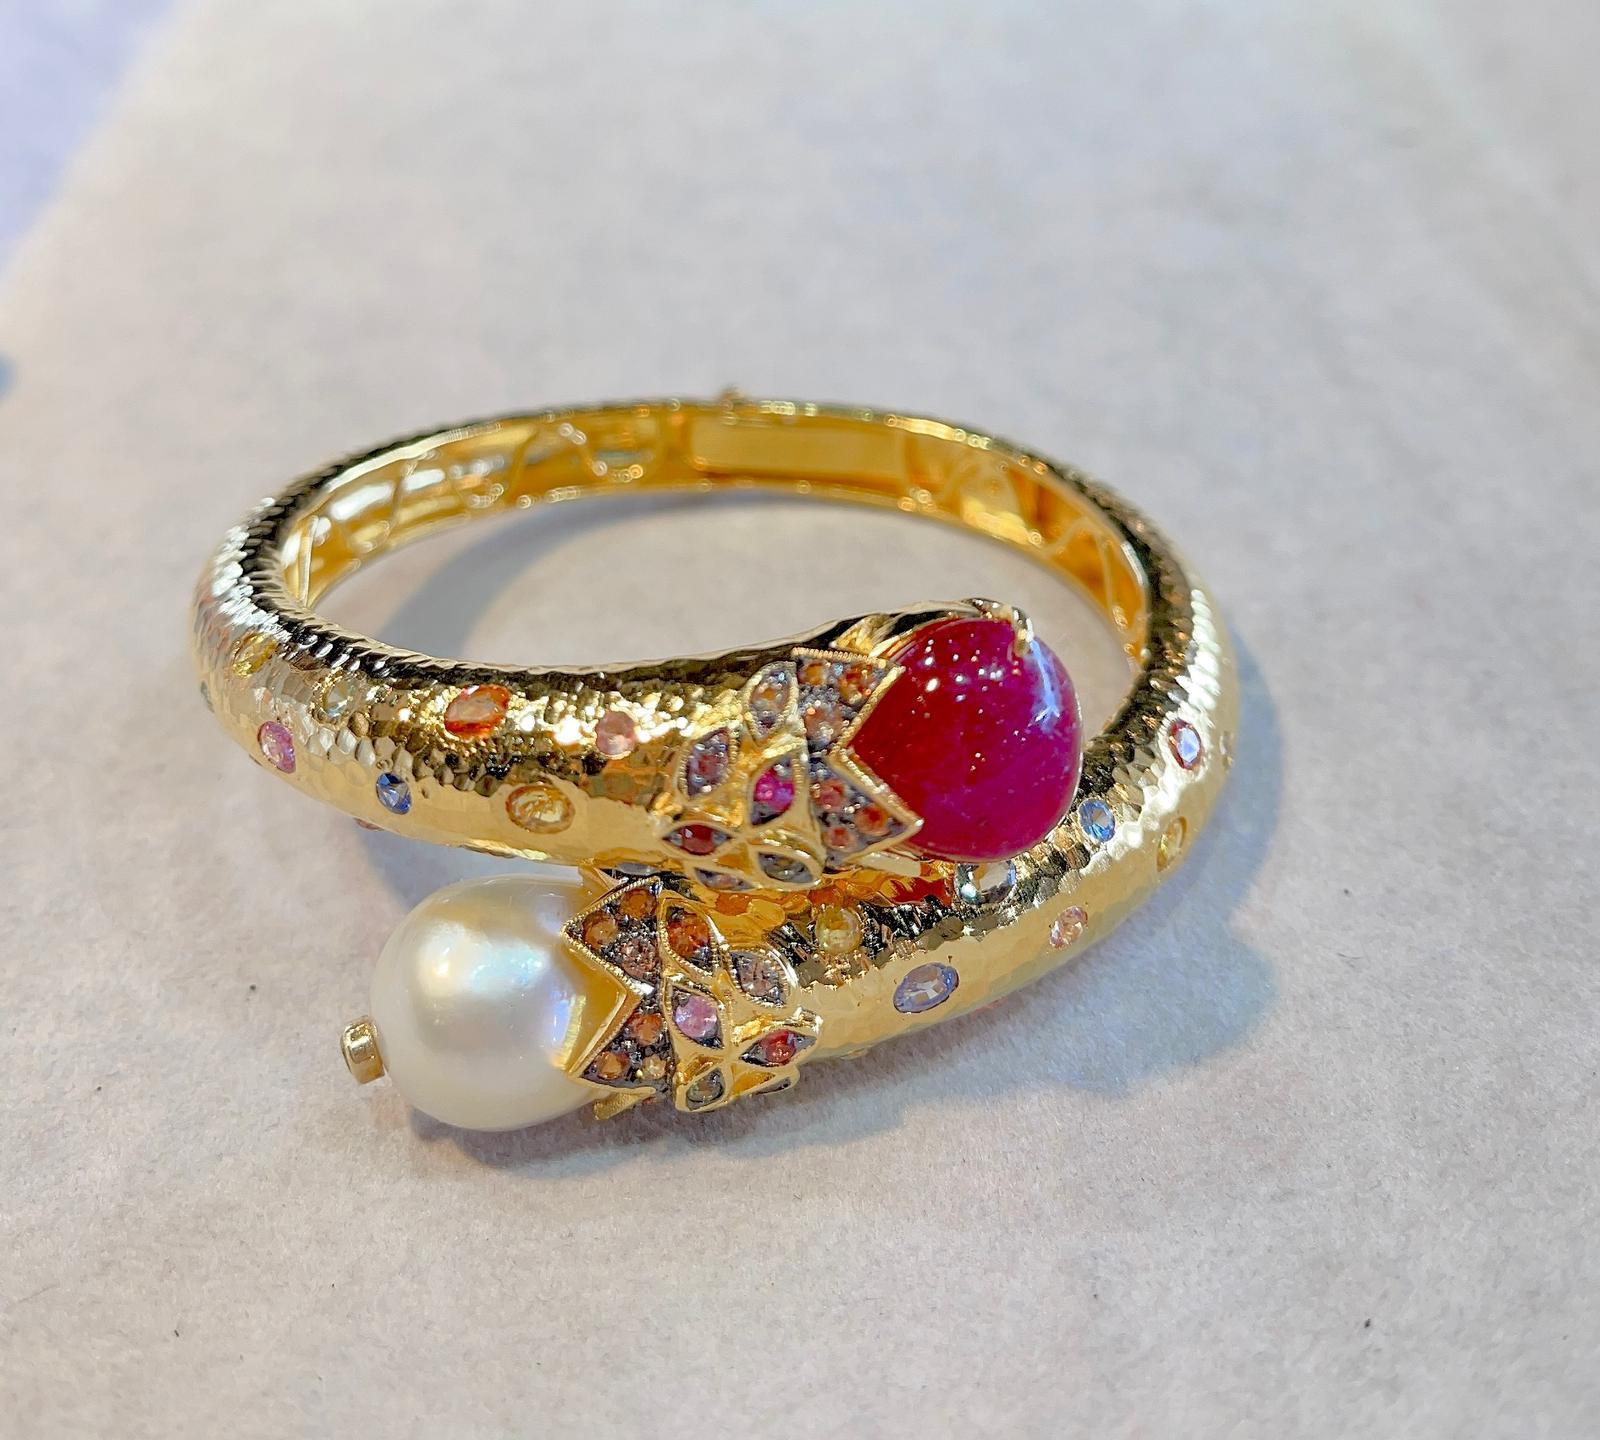 Baroque Bochic “Orient” Ruby, Fancy Sapphire and South Sea Bangle Set in 22k Gold